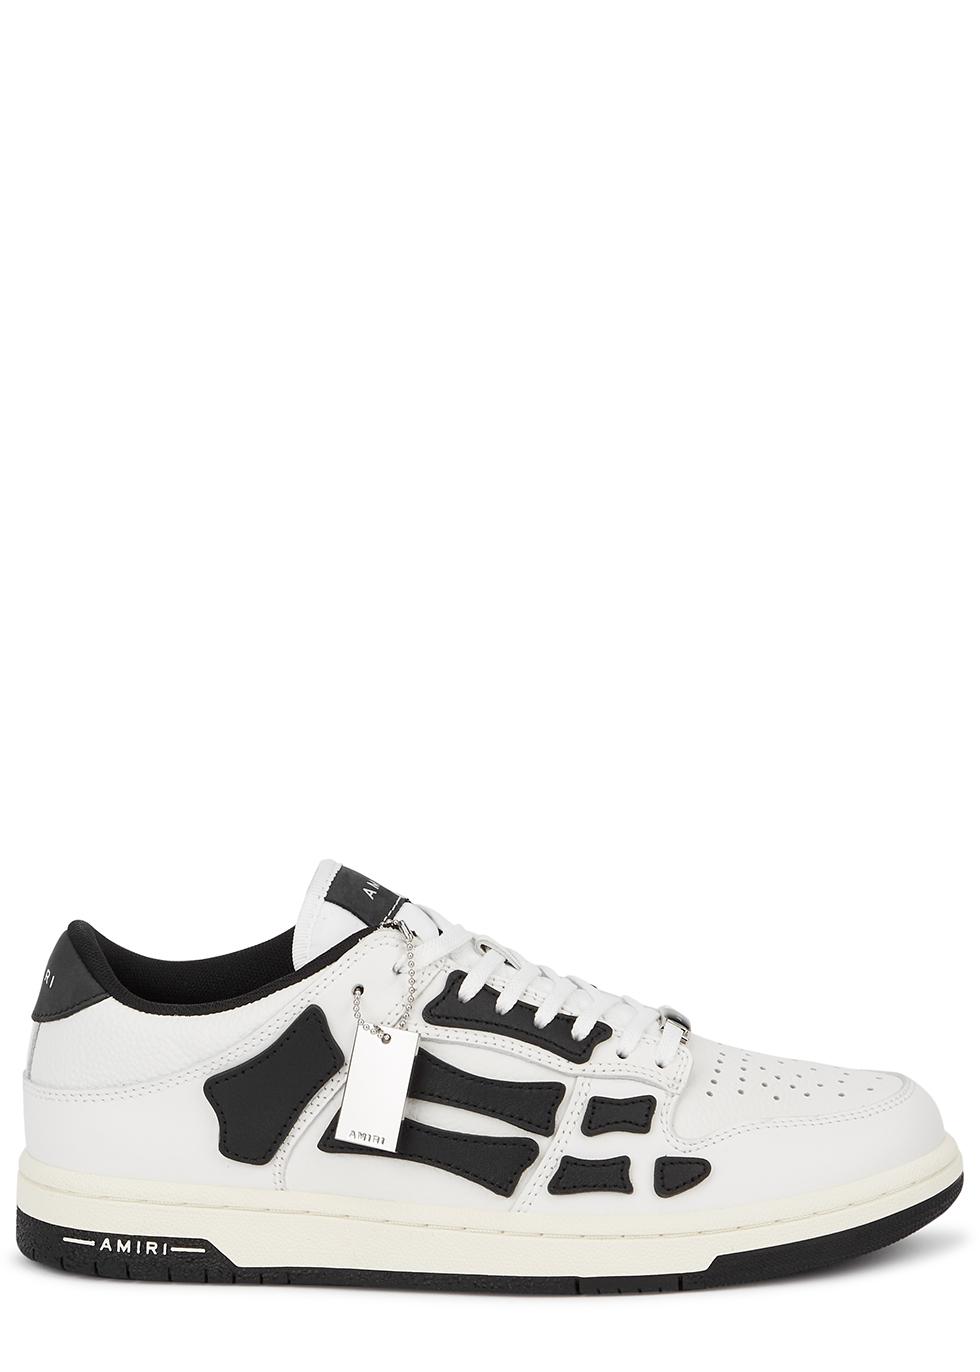 Amiri Skel Monochrome Leather Sneakers in White | Lyst